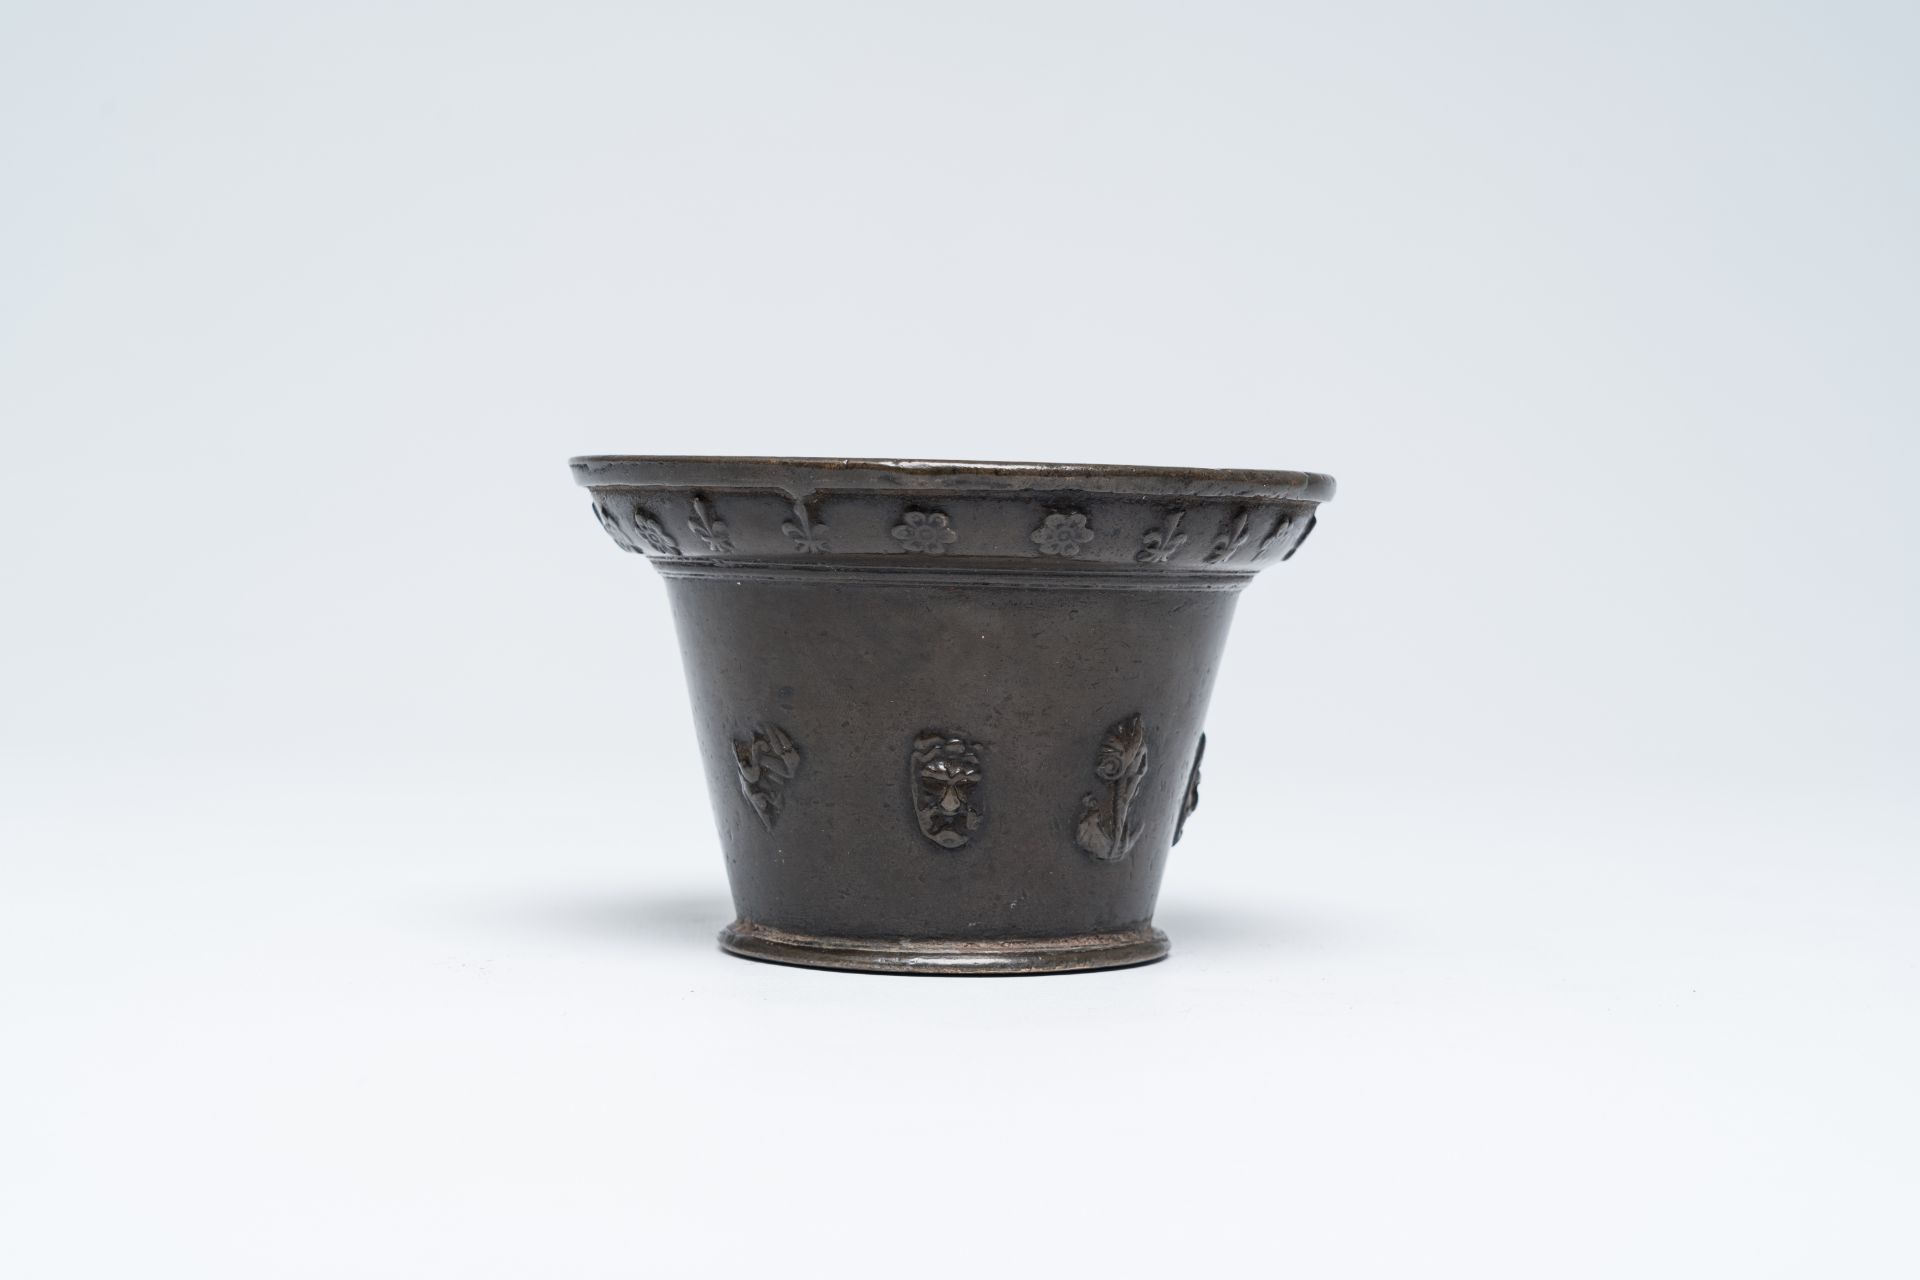 A French bronze 'mascarons' mortar, probably Lyon, 17th C. - Image 3 of 7